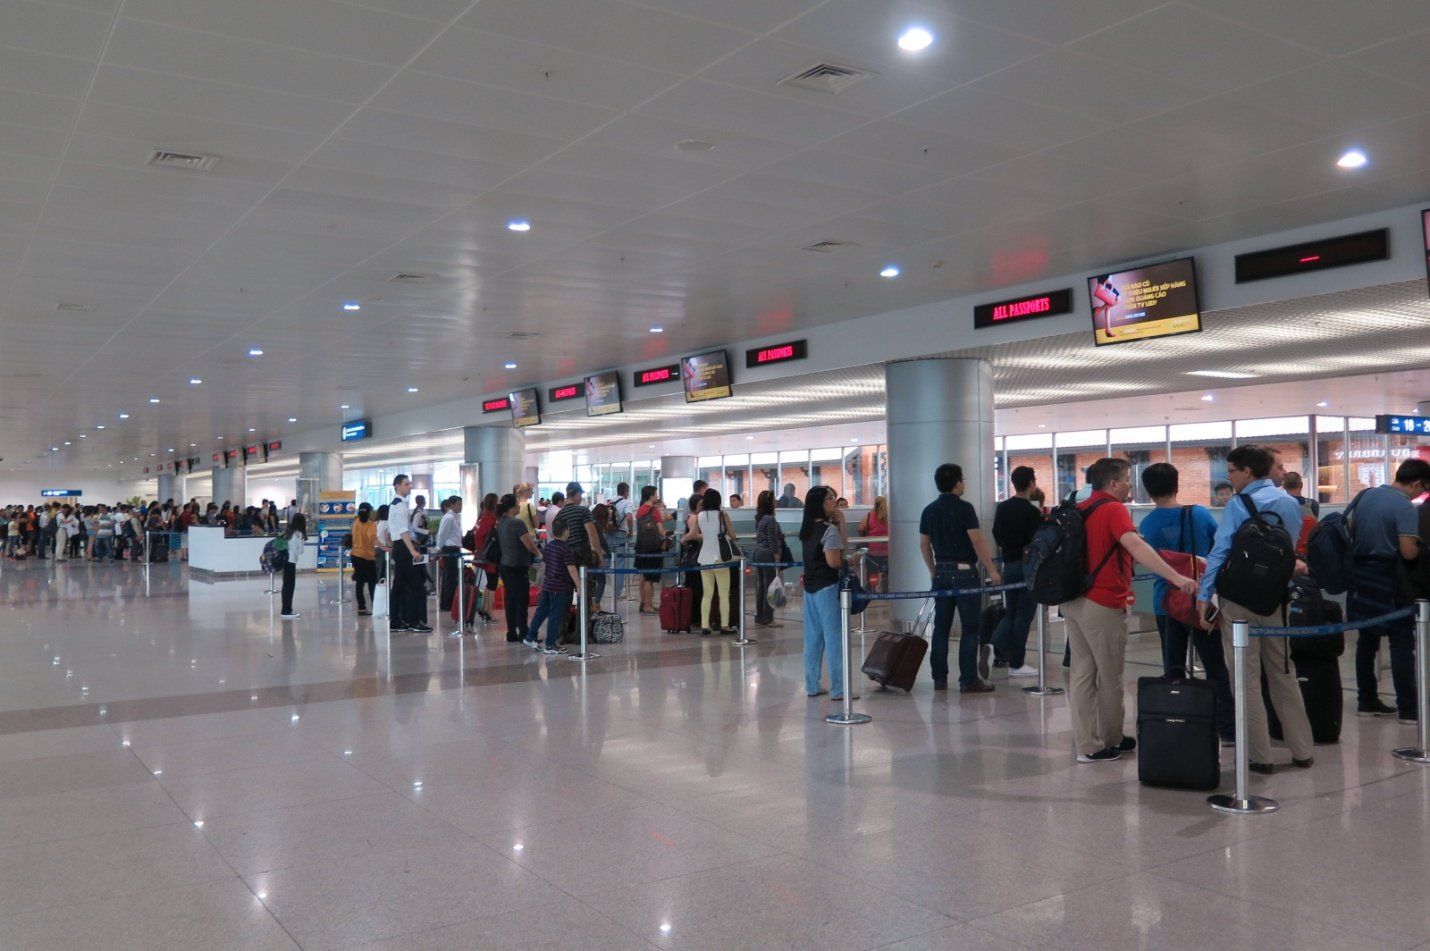 A group of people are standing in a line at an airport.